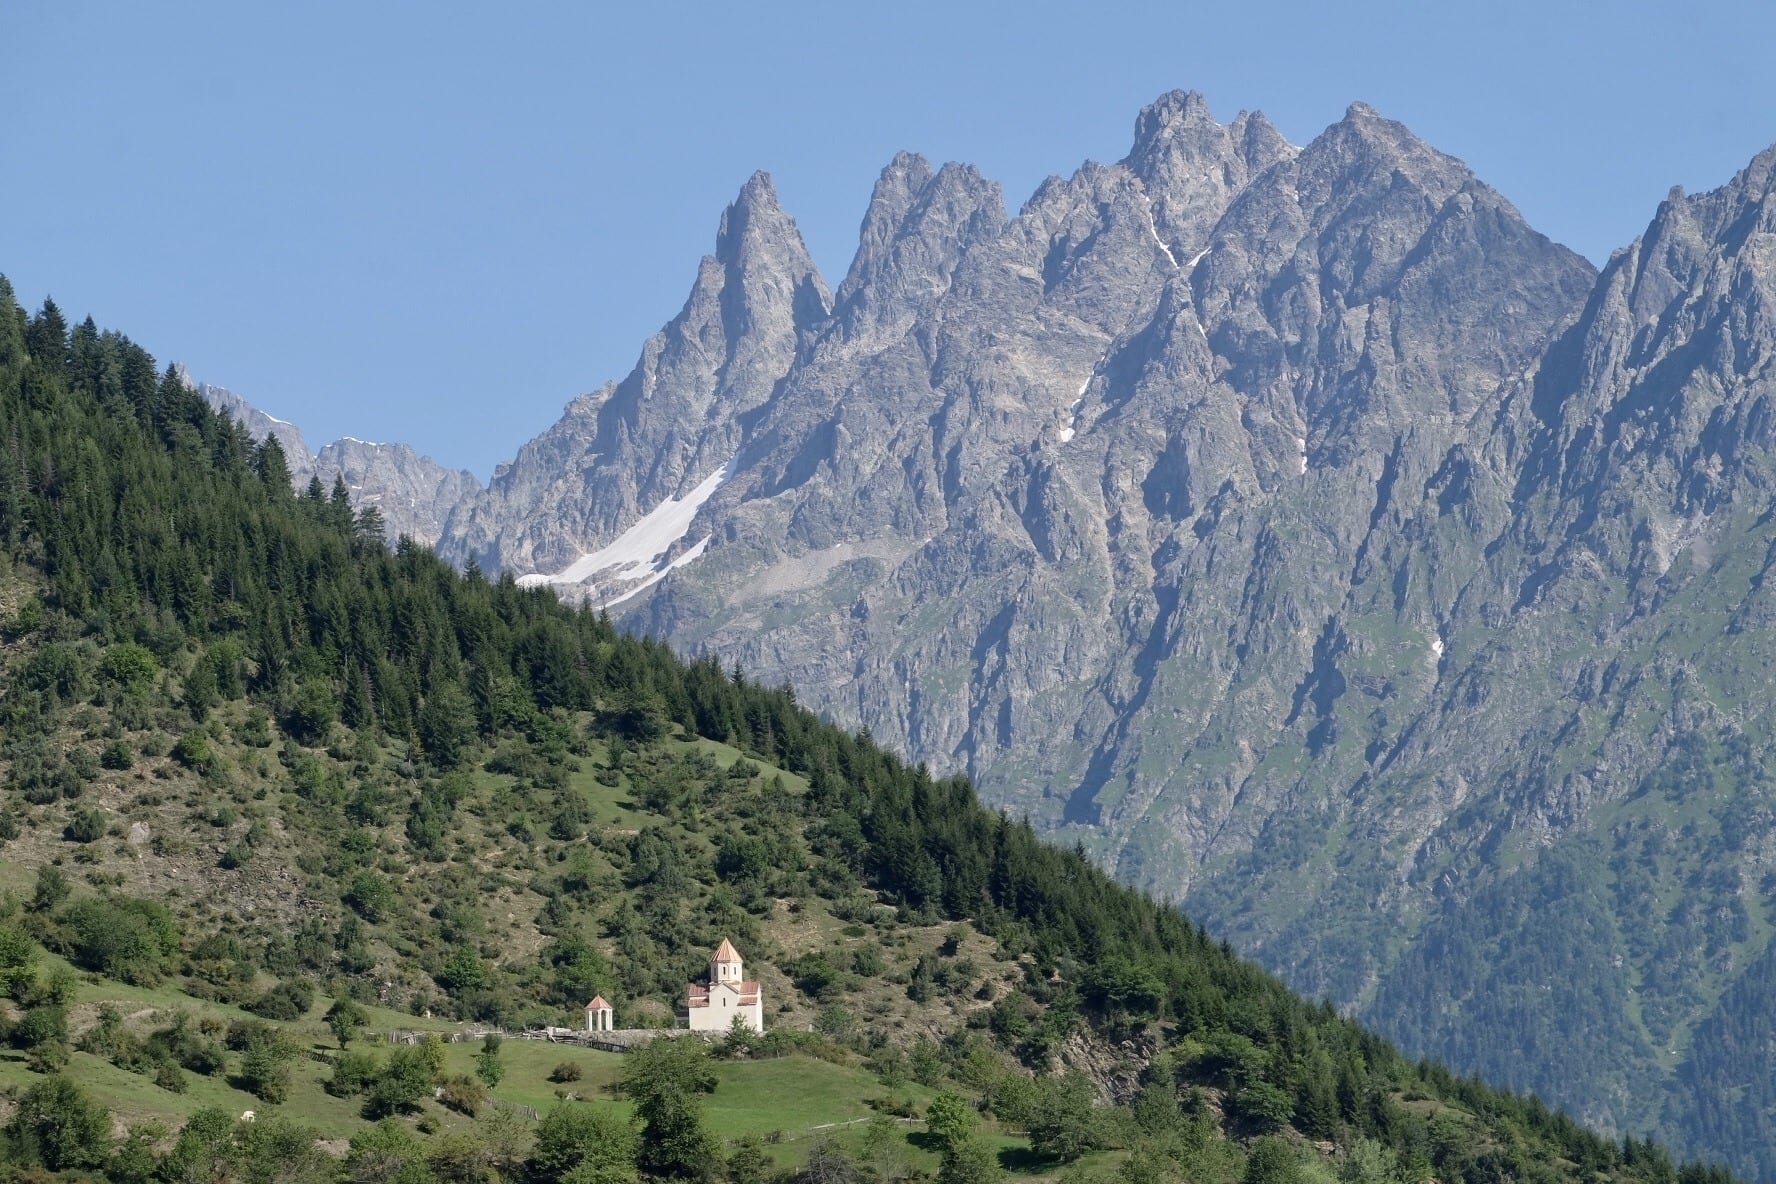 Two mountains: a green one with a tiny white church perched on it, in front of a taller, jagged gray mountain in Svaneti, Georgia.